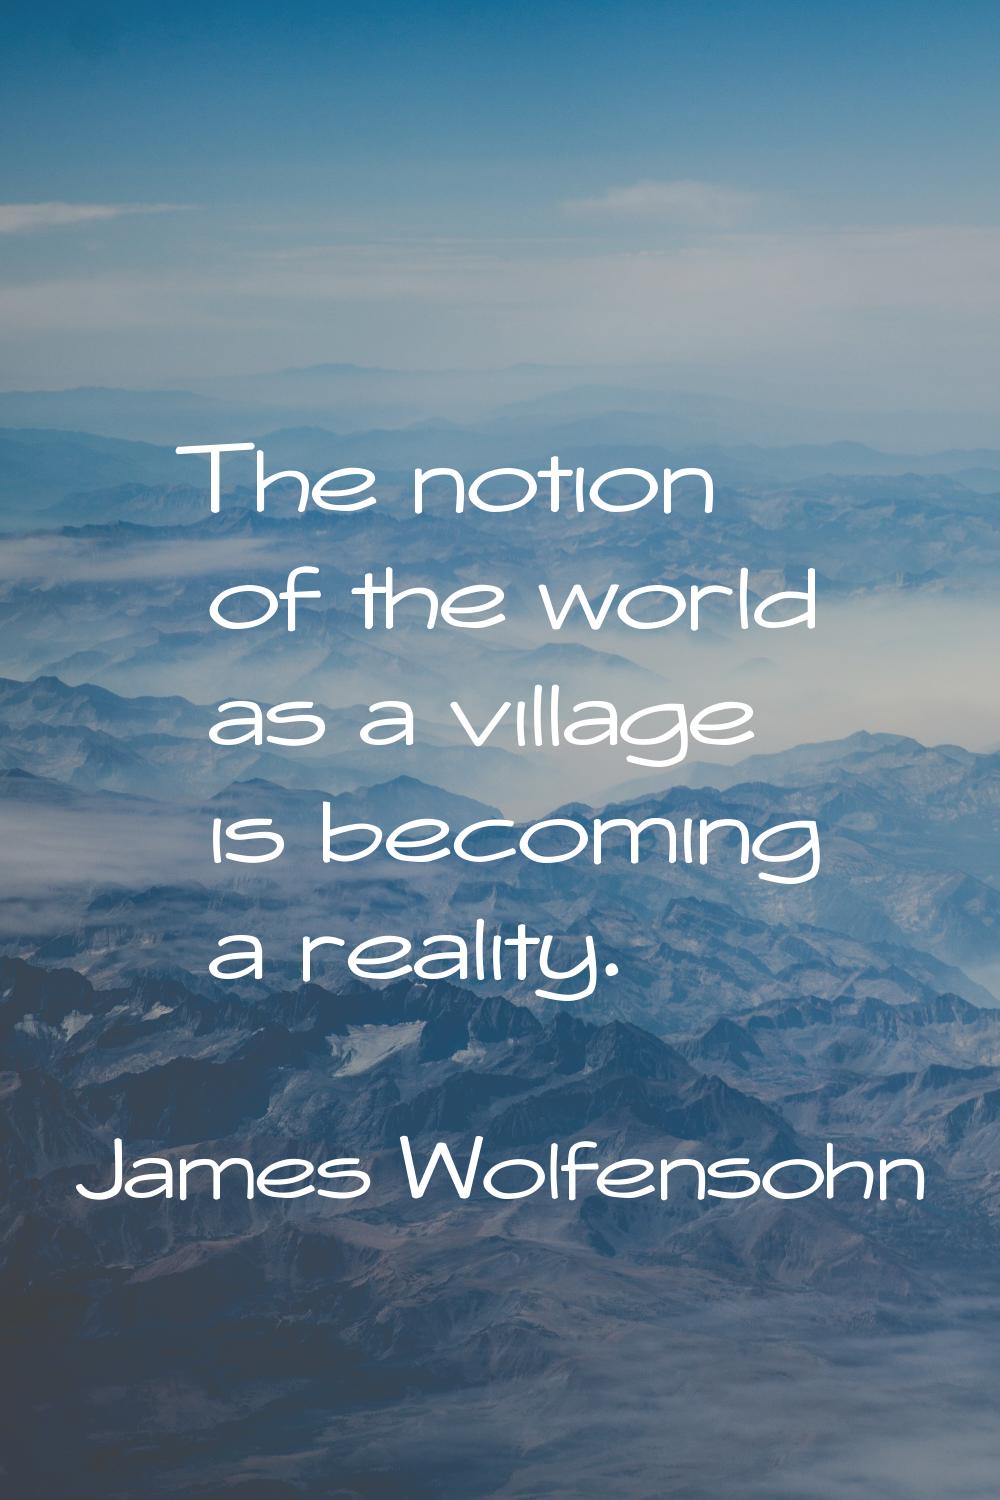 The notion of the world as a village is becoming a reality.